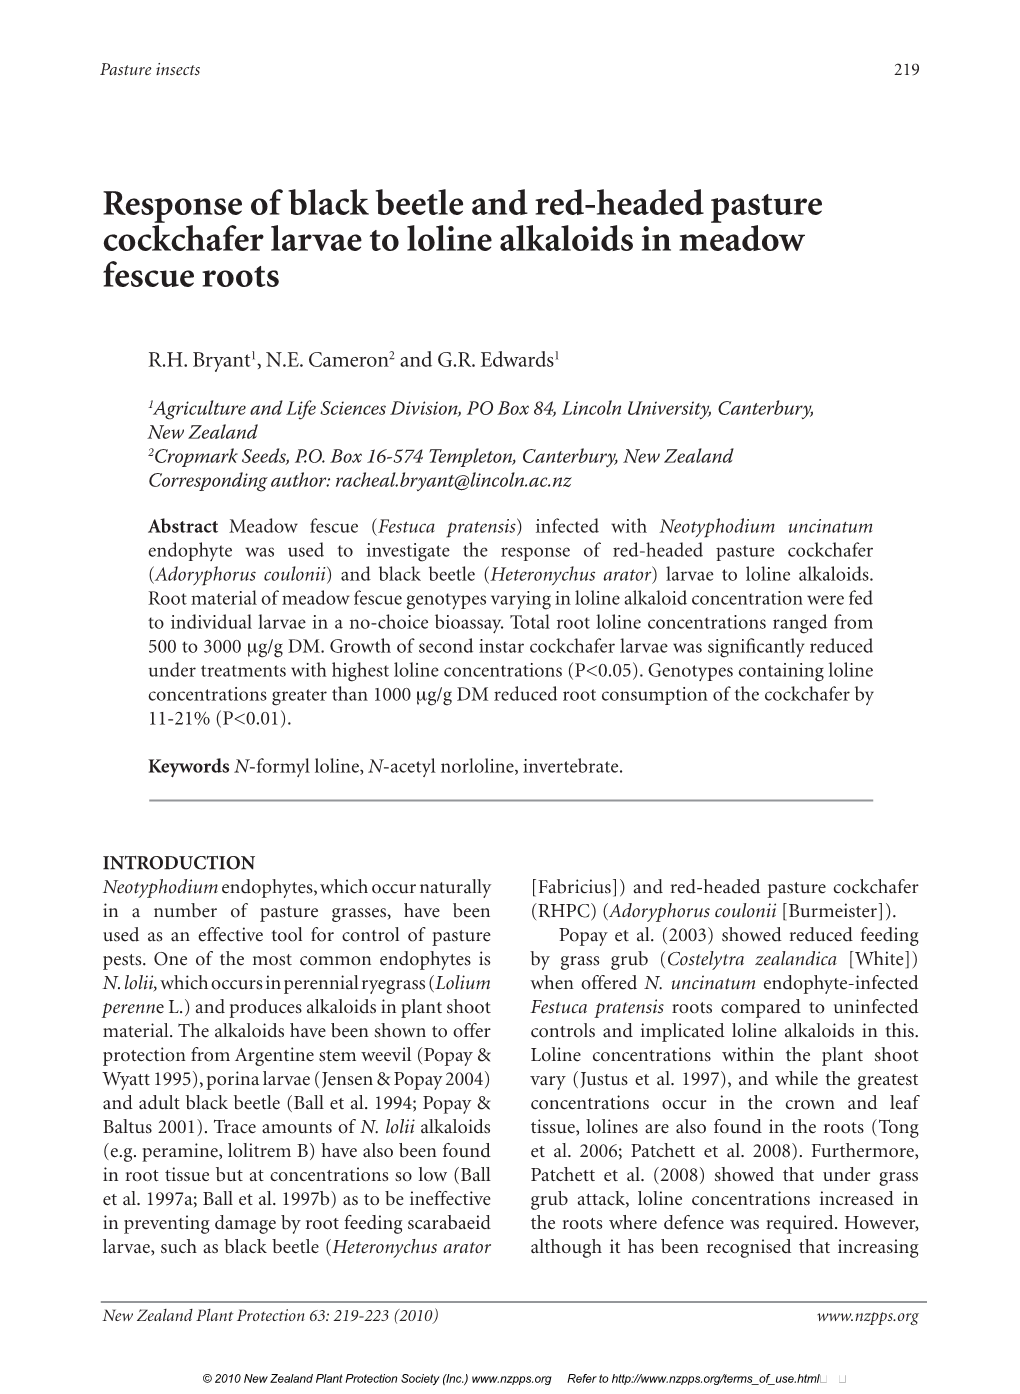 Response of Black Beetle and Red-Headed Pasture Cockchafer Larvae to Loline Alkaloids in Meadow Fescue Roots